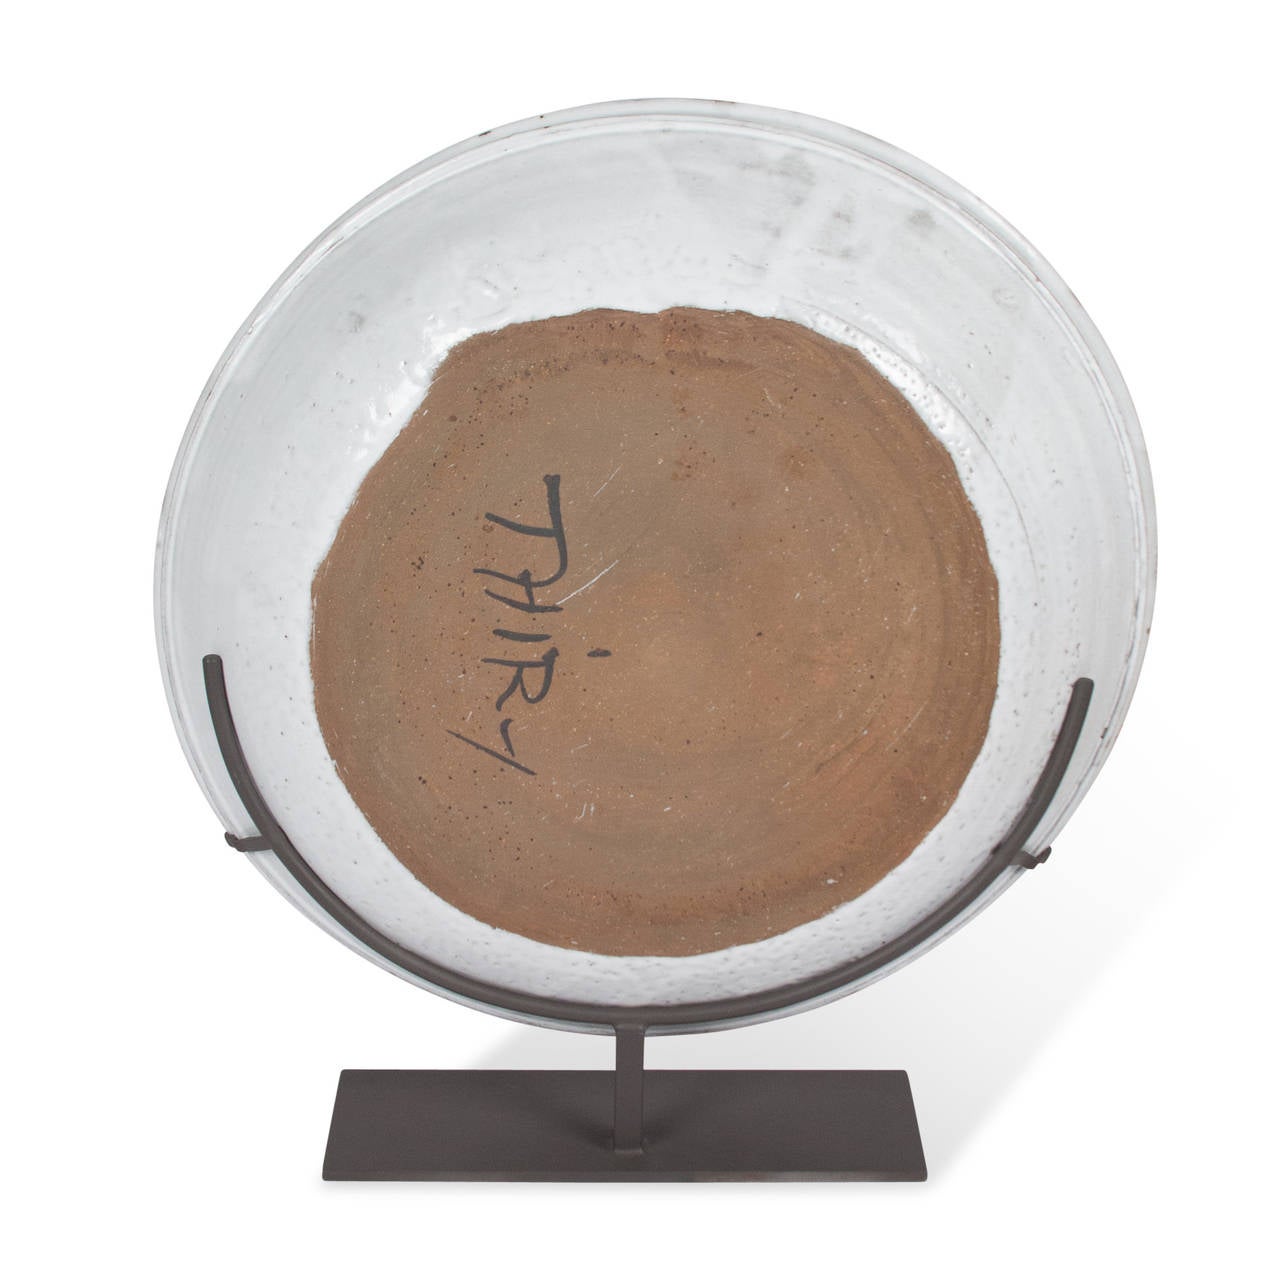 Mid-20th Century Large Glazed Stoneware Ceramic Charger by Albert Thiry, French, circa 1950 For Sale